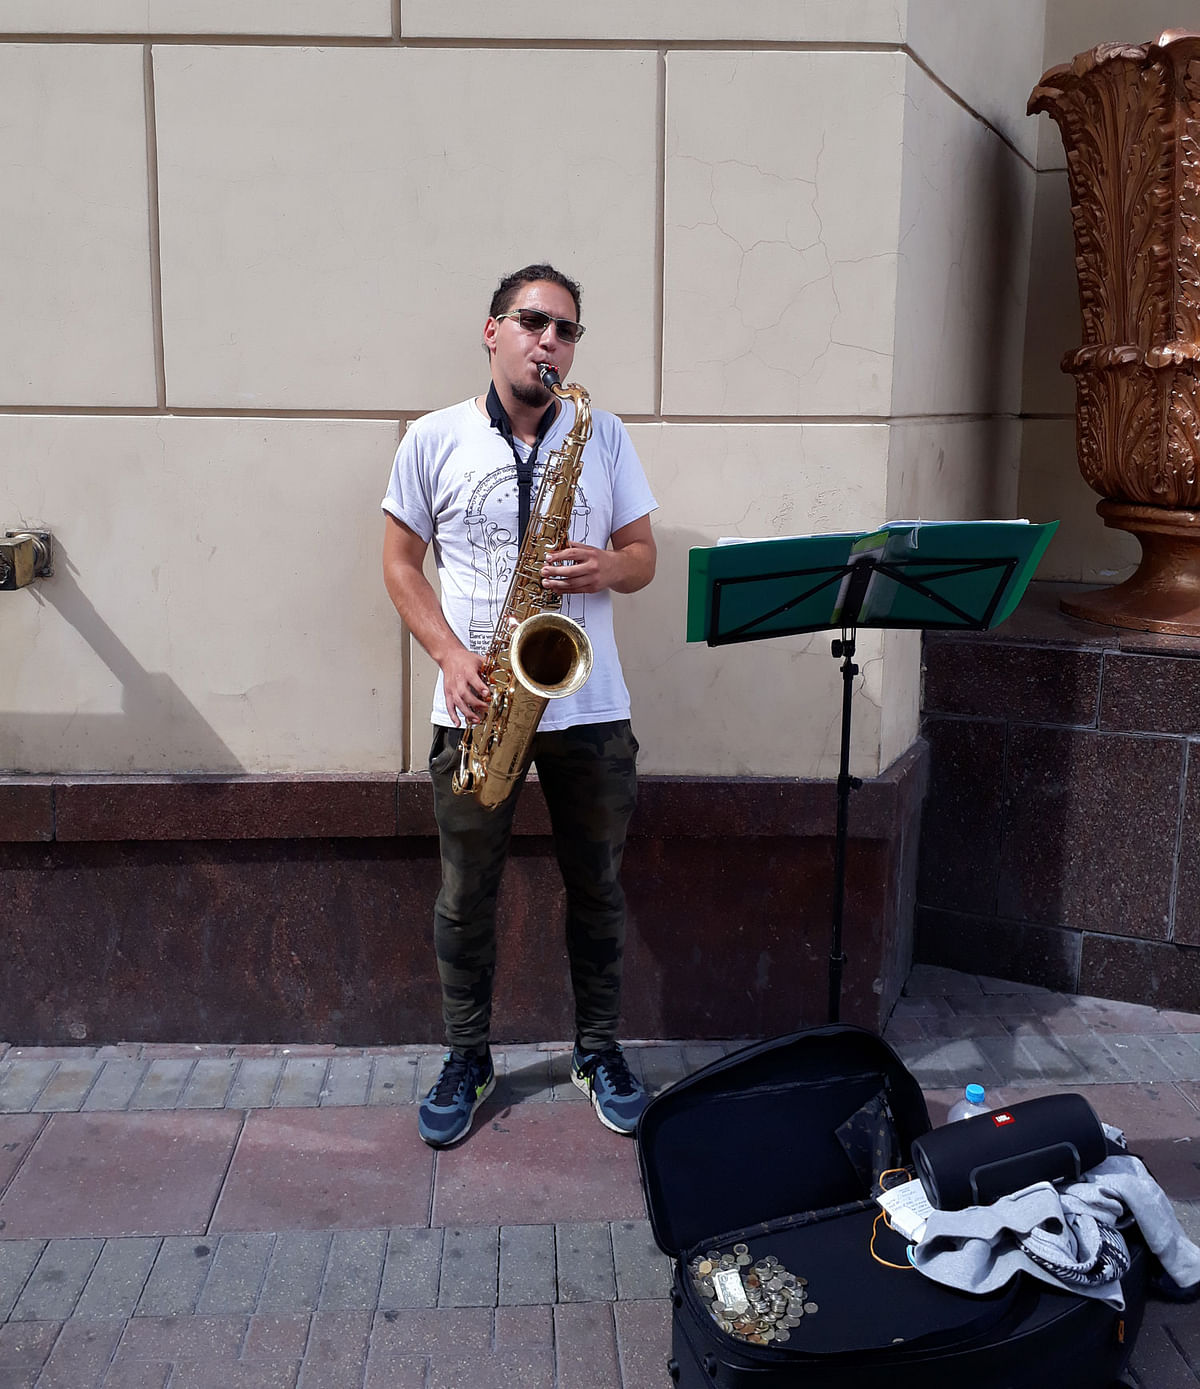 A musician plays a saxophone next to a tourist joint. He later collected money donated by the passersby.Photo: Quamrul Hassan